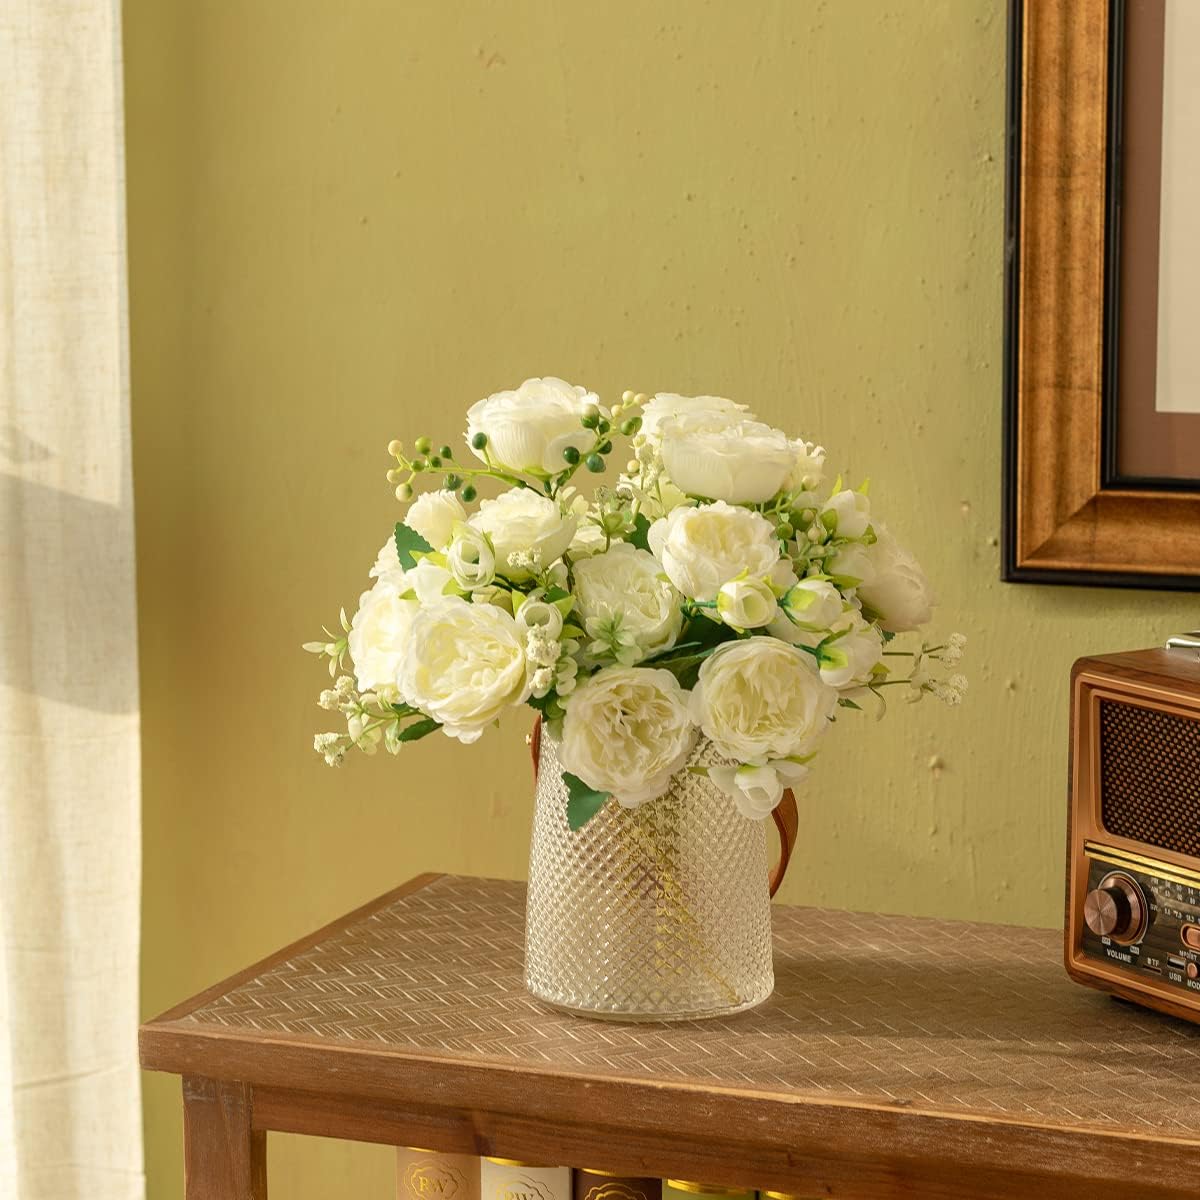 Hobyhoon-Artificial Flowers-White-for Decoration-6012